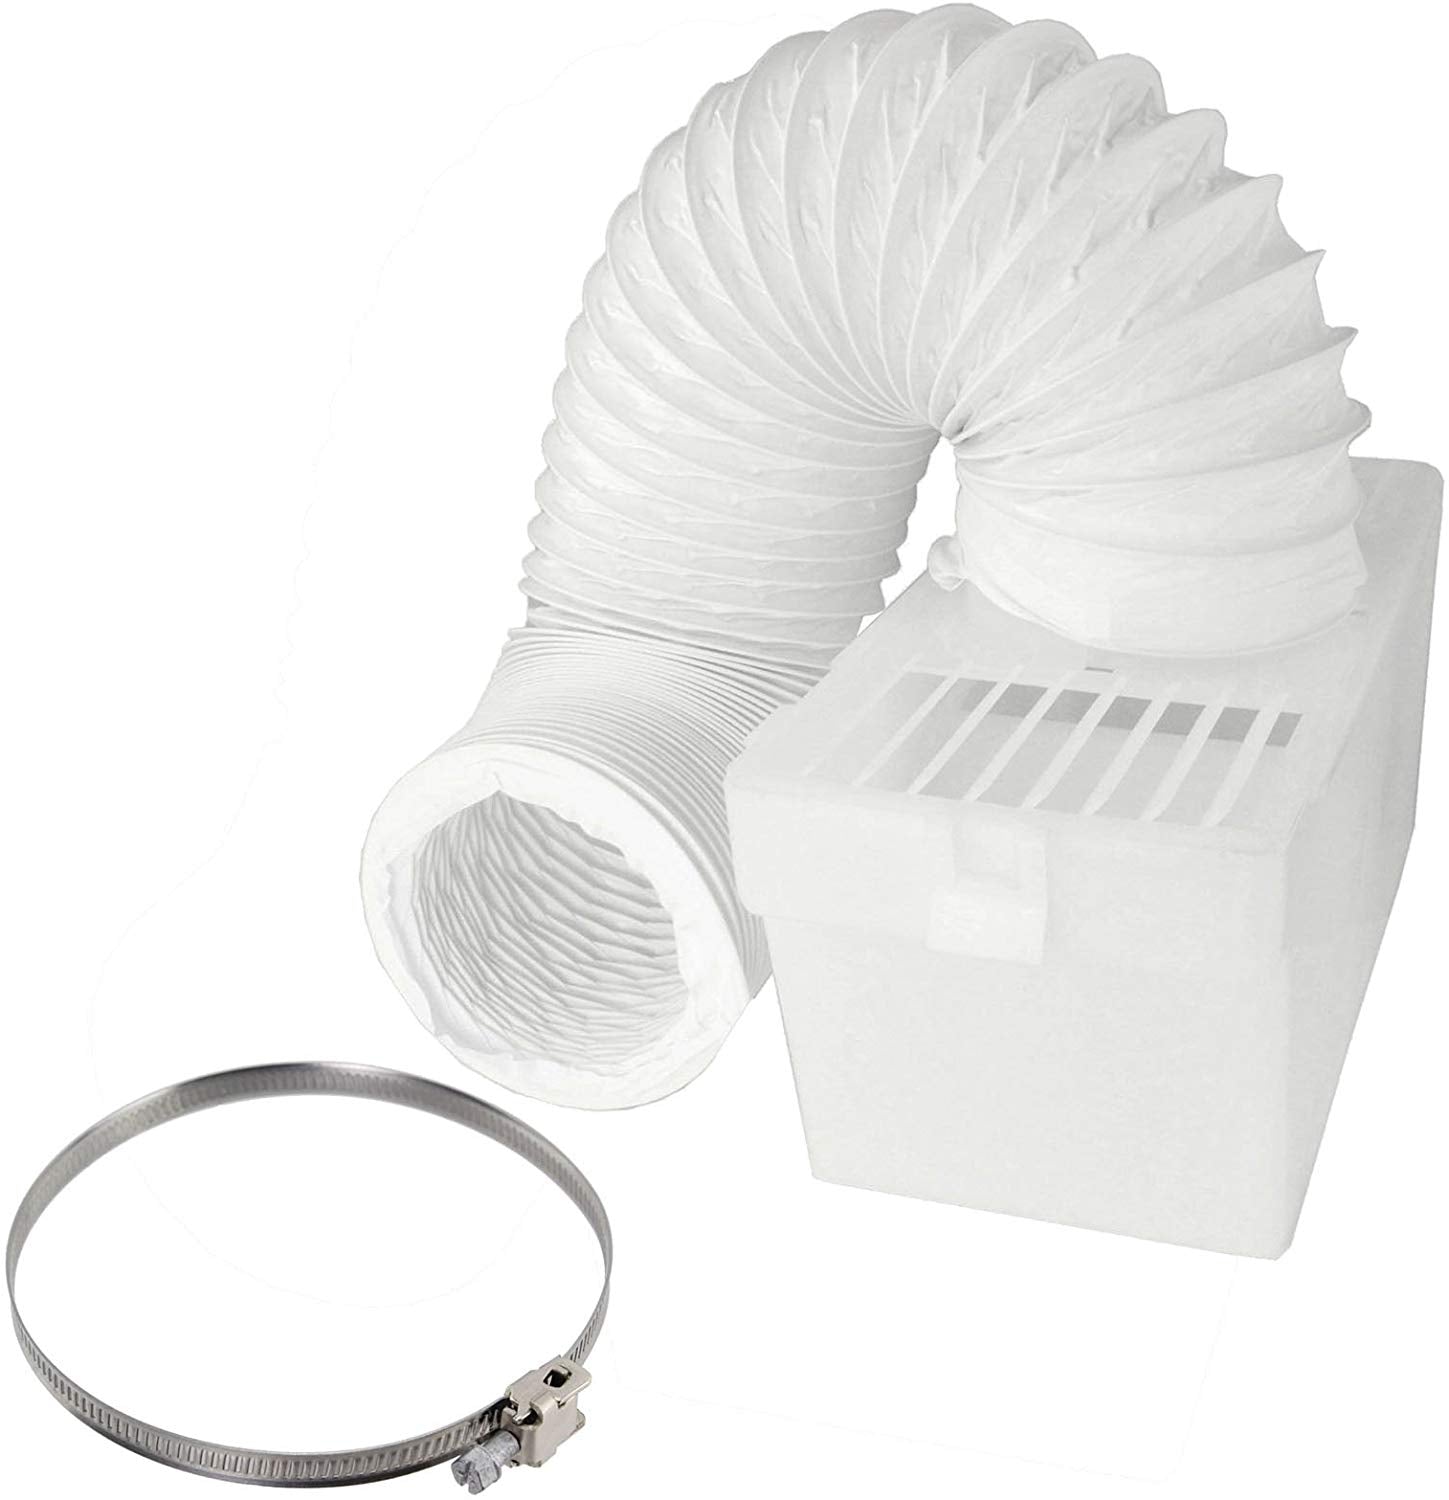 Condenser Vent Box & Hose Kit With Screw Clip for Candy Vented Tumble Dryer (4" / 100mm Diameter)